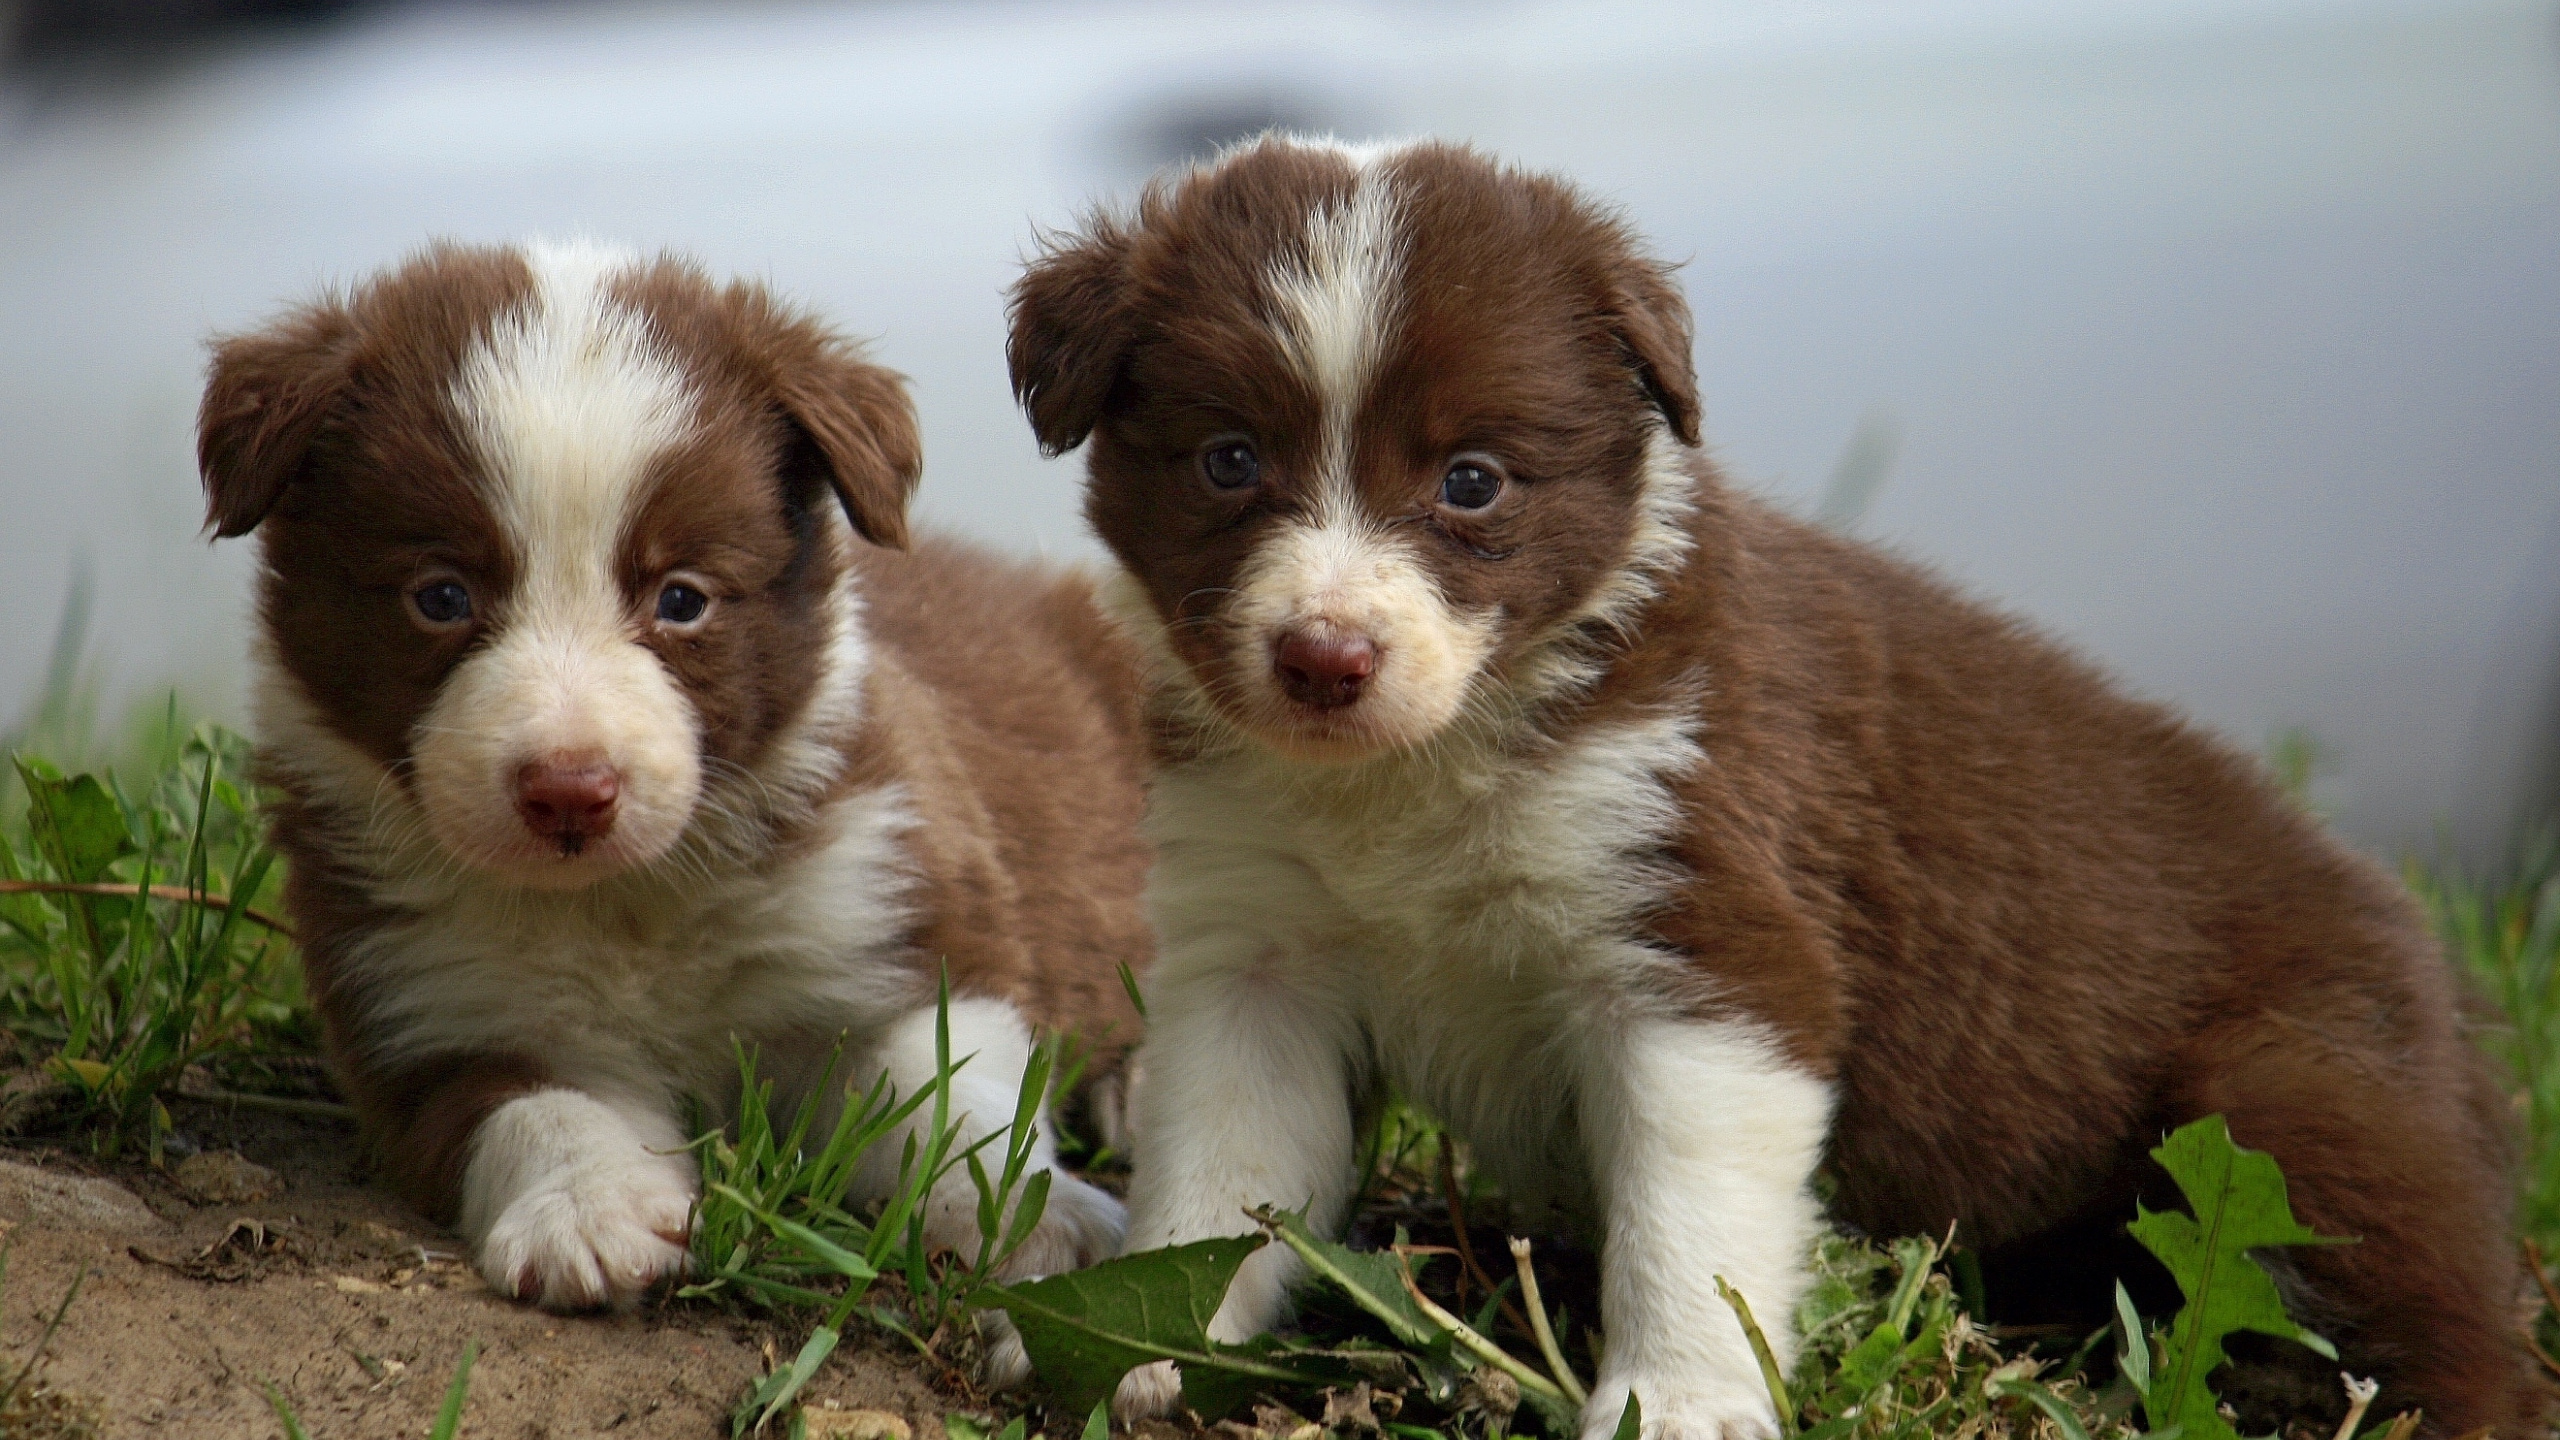 Brown and White Short Coated Puppy on Green Grass During Daytime. Wallpaper in 2560x1440 Resolution